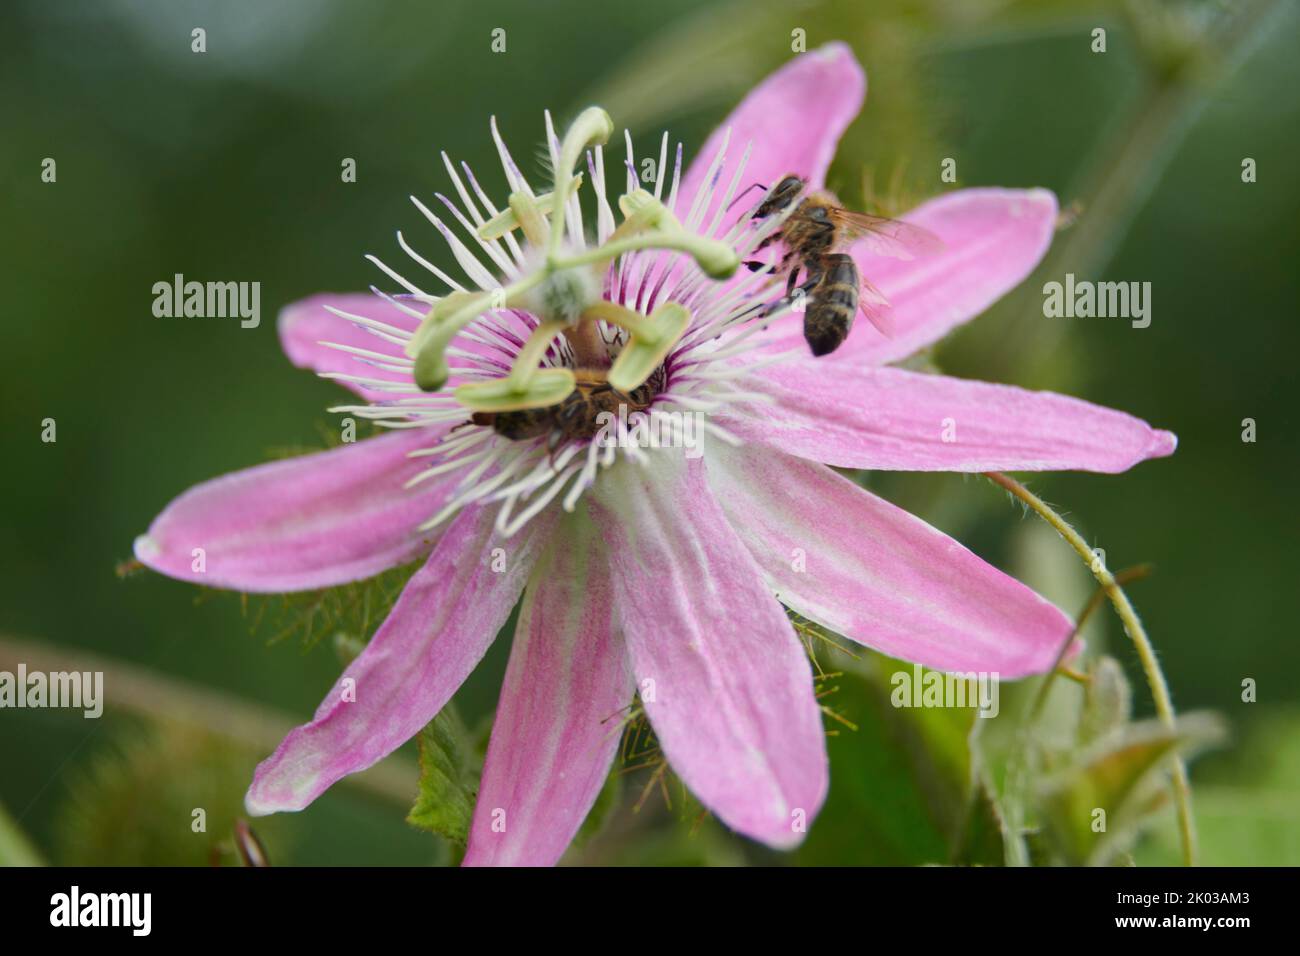 Insect on a passion flower Stock Photo